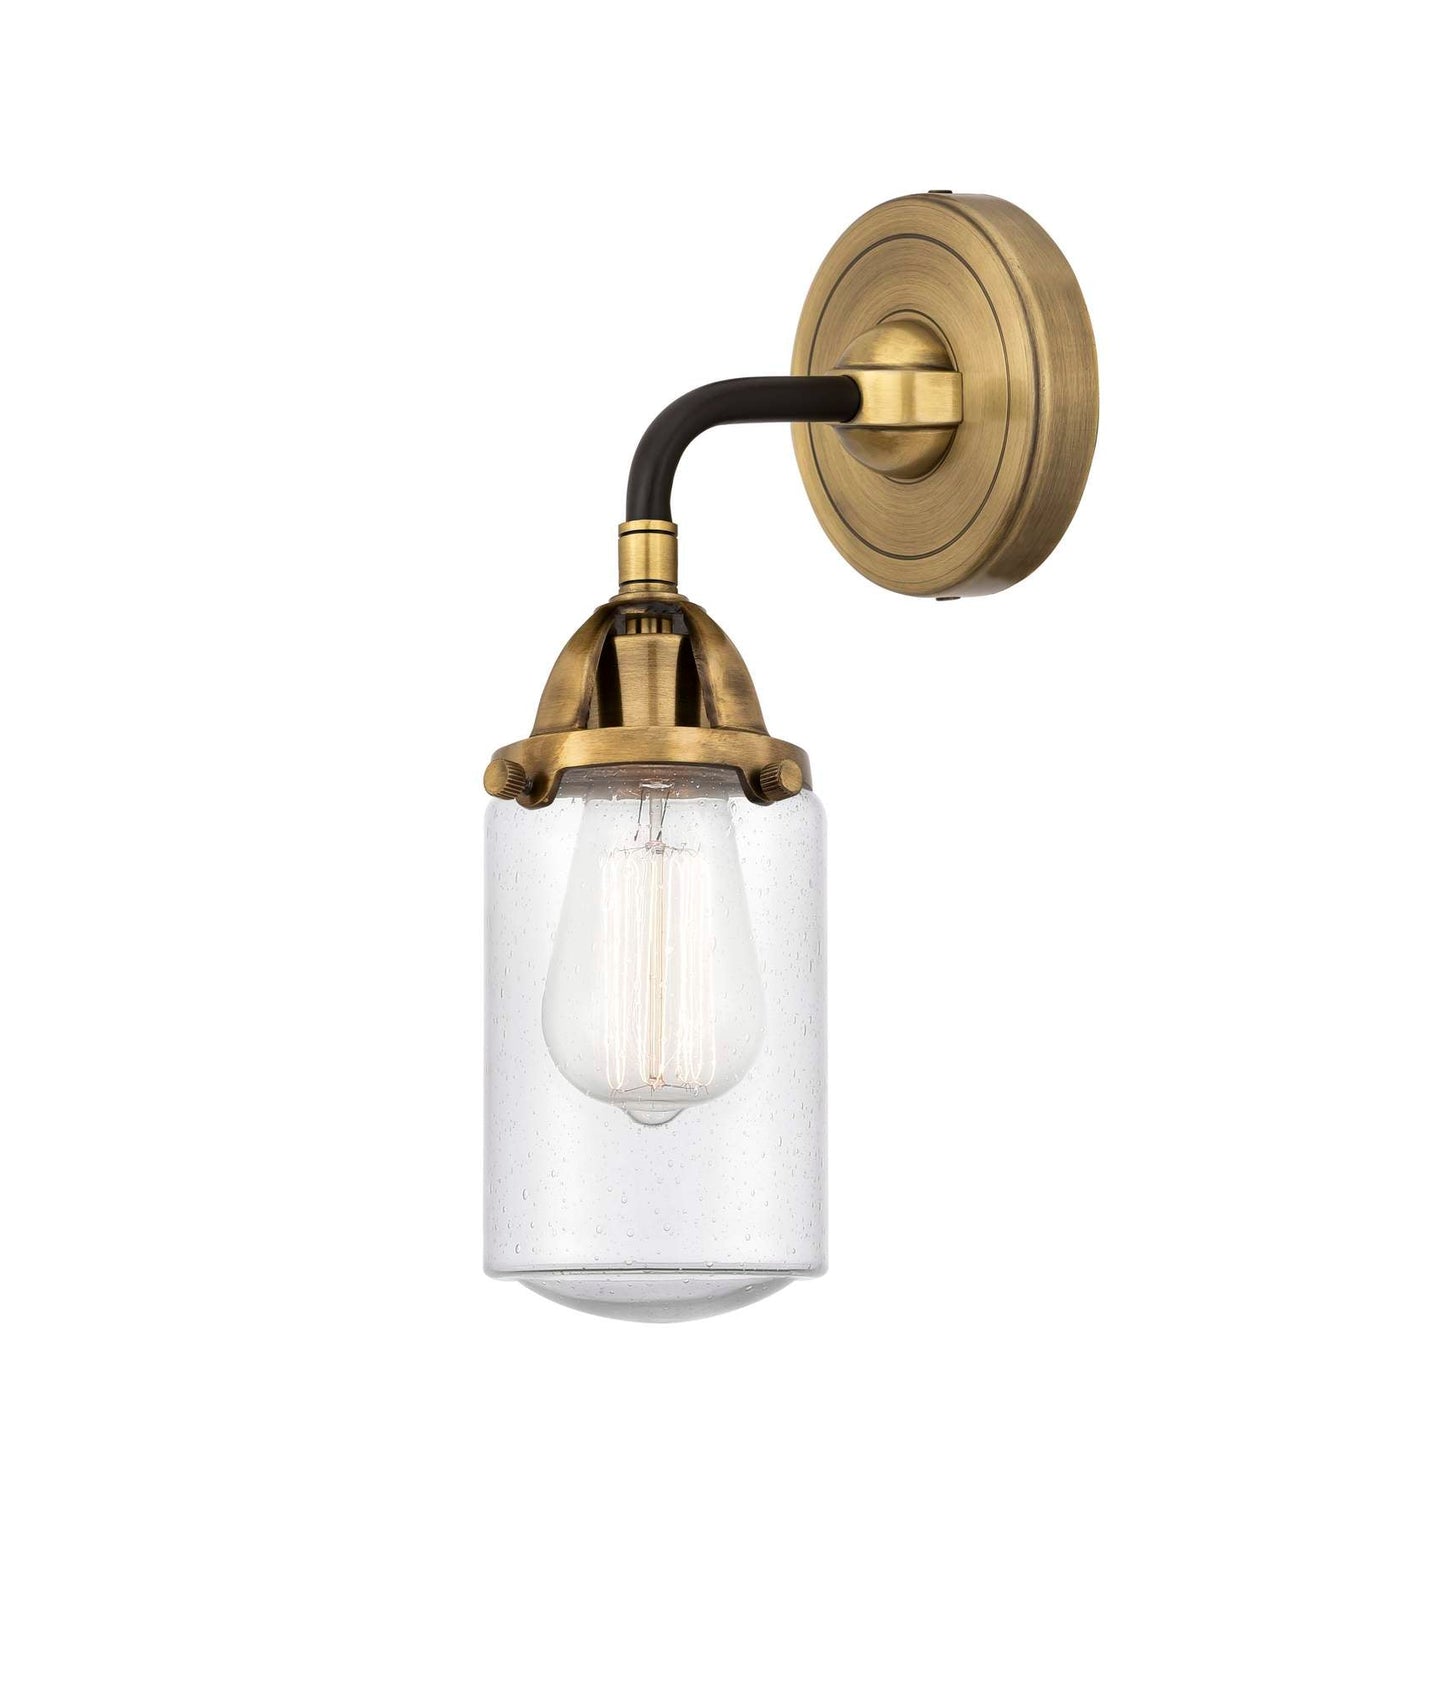 288-1W-BAB-G314 1-Light 4.5" Black Antique Brass Sconce - Seedy Dover Glass - LED Bulb - Dimmensions: 4.5 x 6.5 x 10.875 - Glass Up or Down: Yes